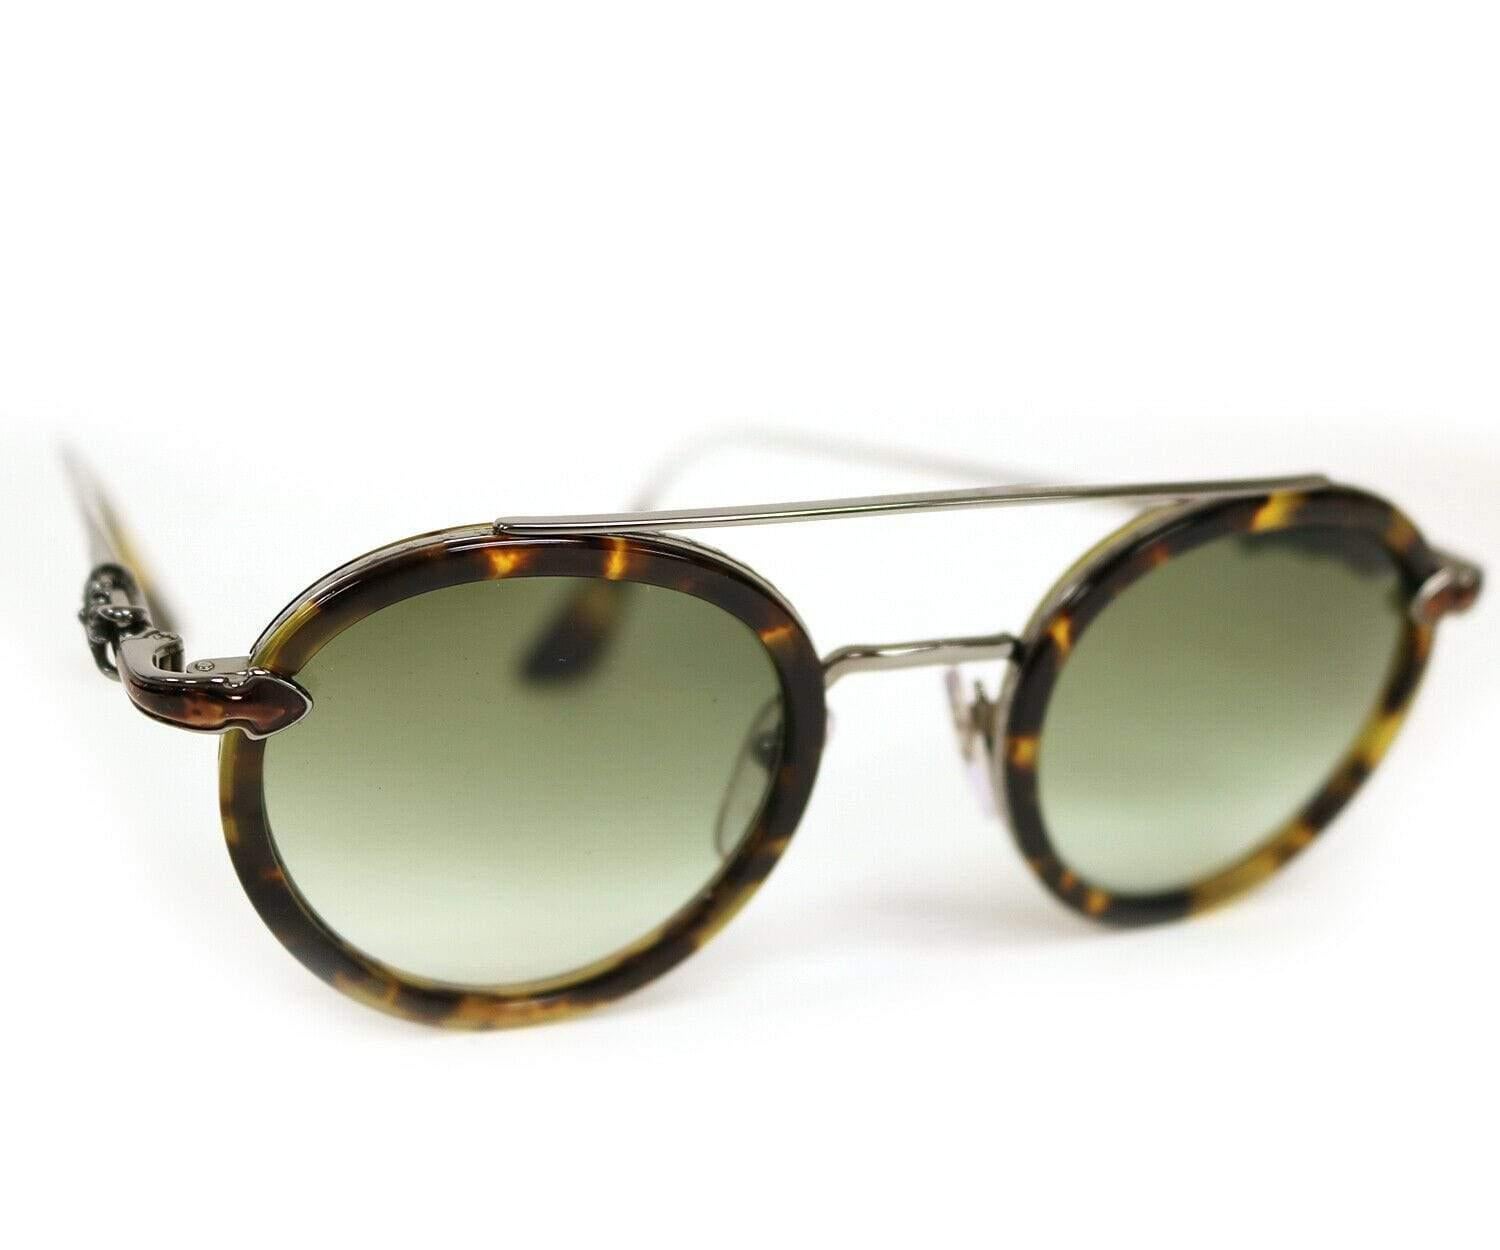 Chrome Hearts BoJimr II Tortoise Sunglasses with Case In Excellent Condition For Sale In Vienna, VA